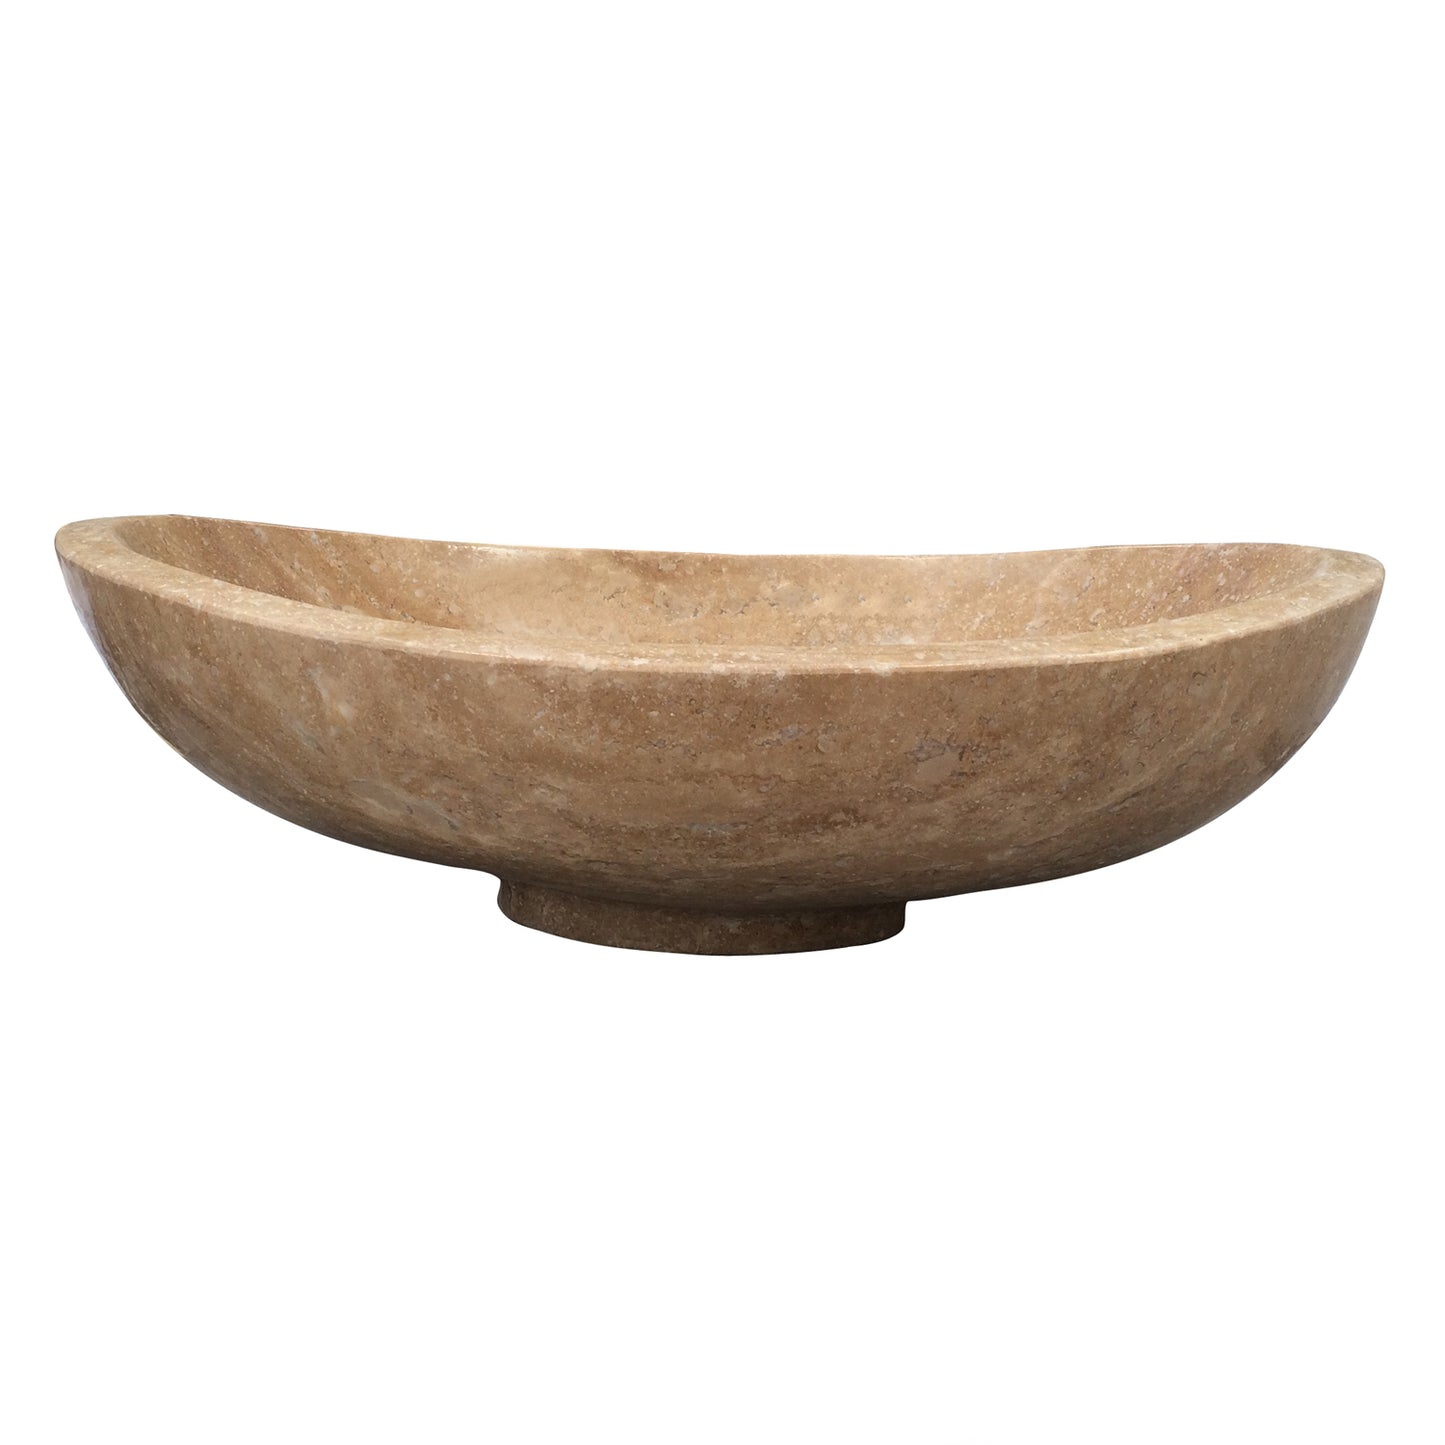 Loomis Beige Travertine Vessel 19-1/2" x 13" Oval with Polished Finish